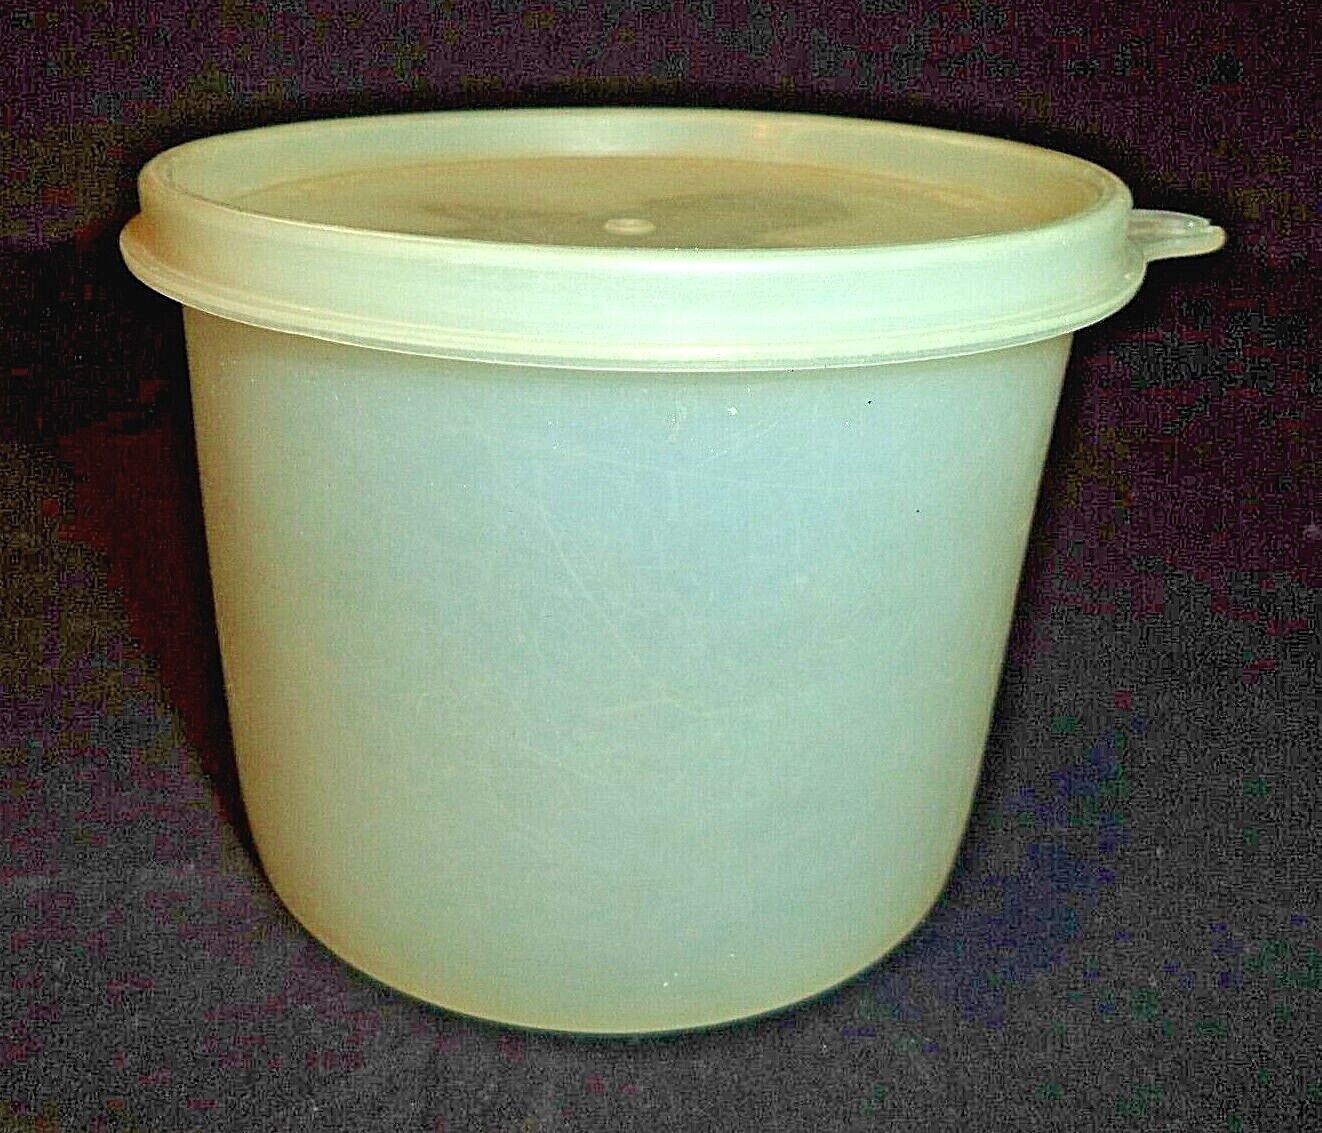 Vintage Tupperware Containers with Lids  You choose, $3.50 ea. Combine Shipping